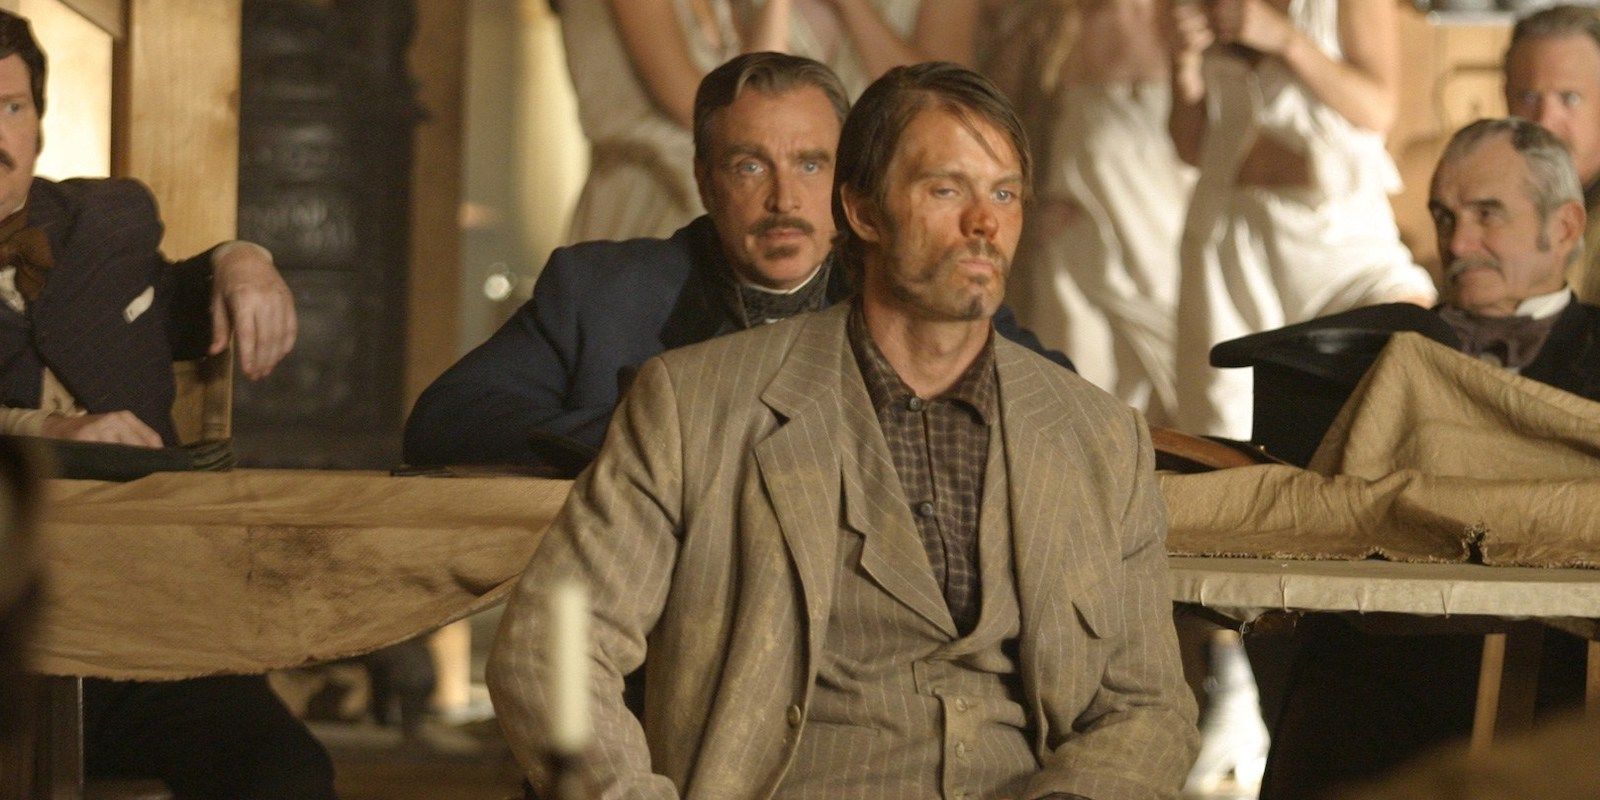 Garrett Dillahunt as Jack McCall sits at his trial in Deadwood